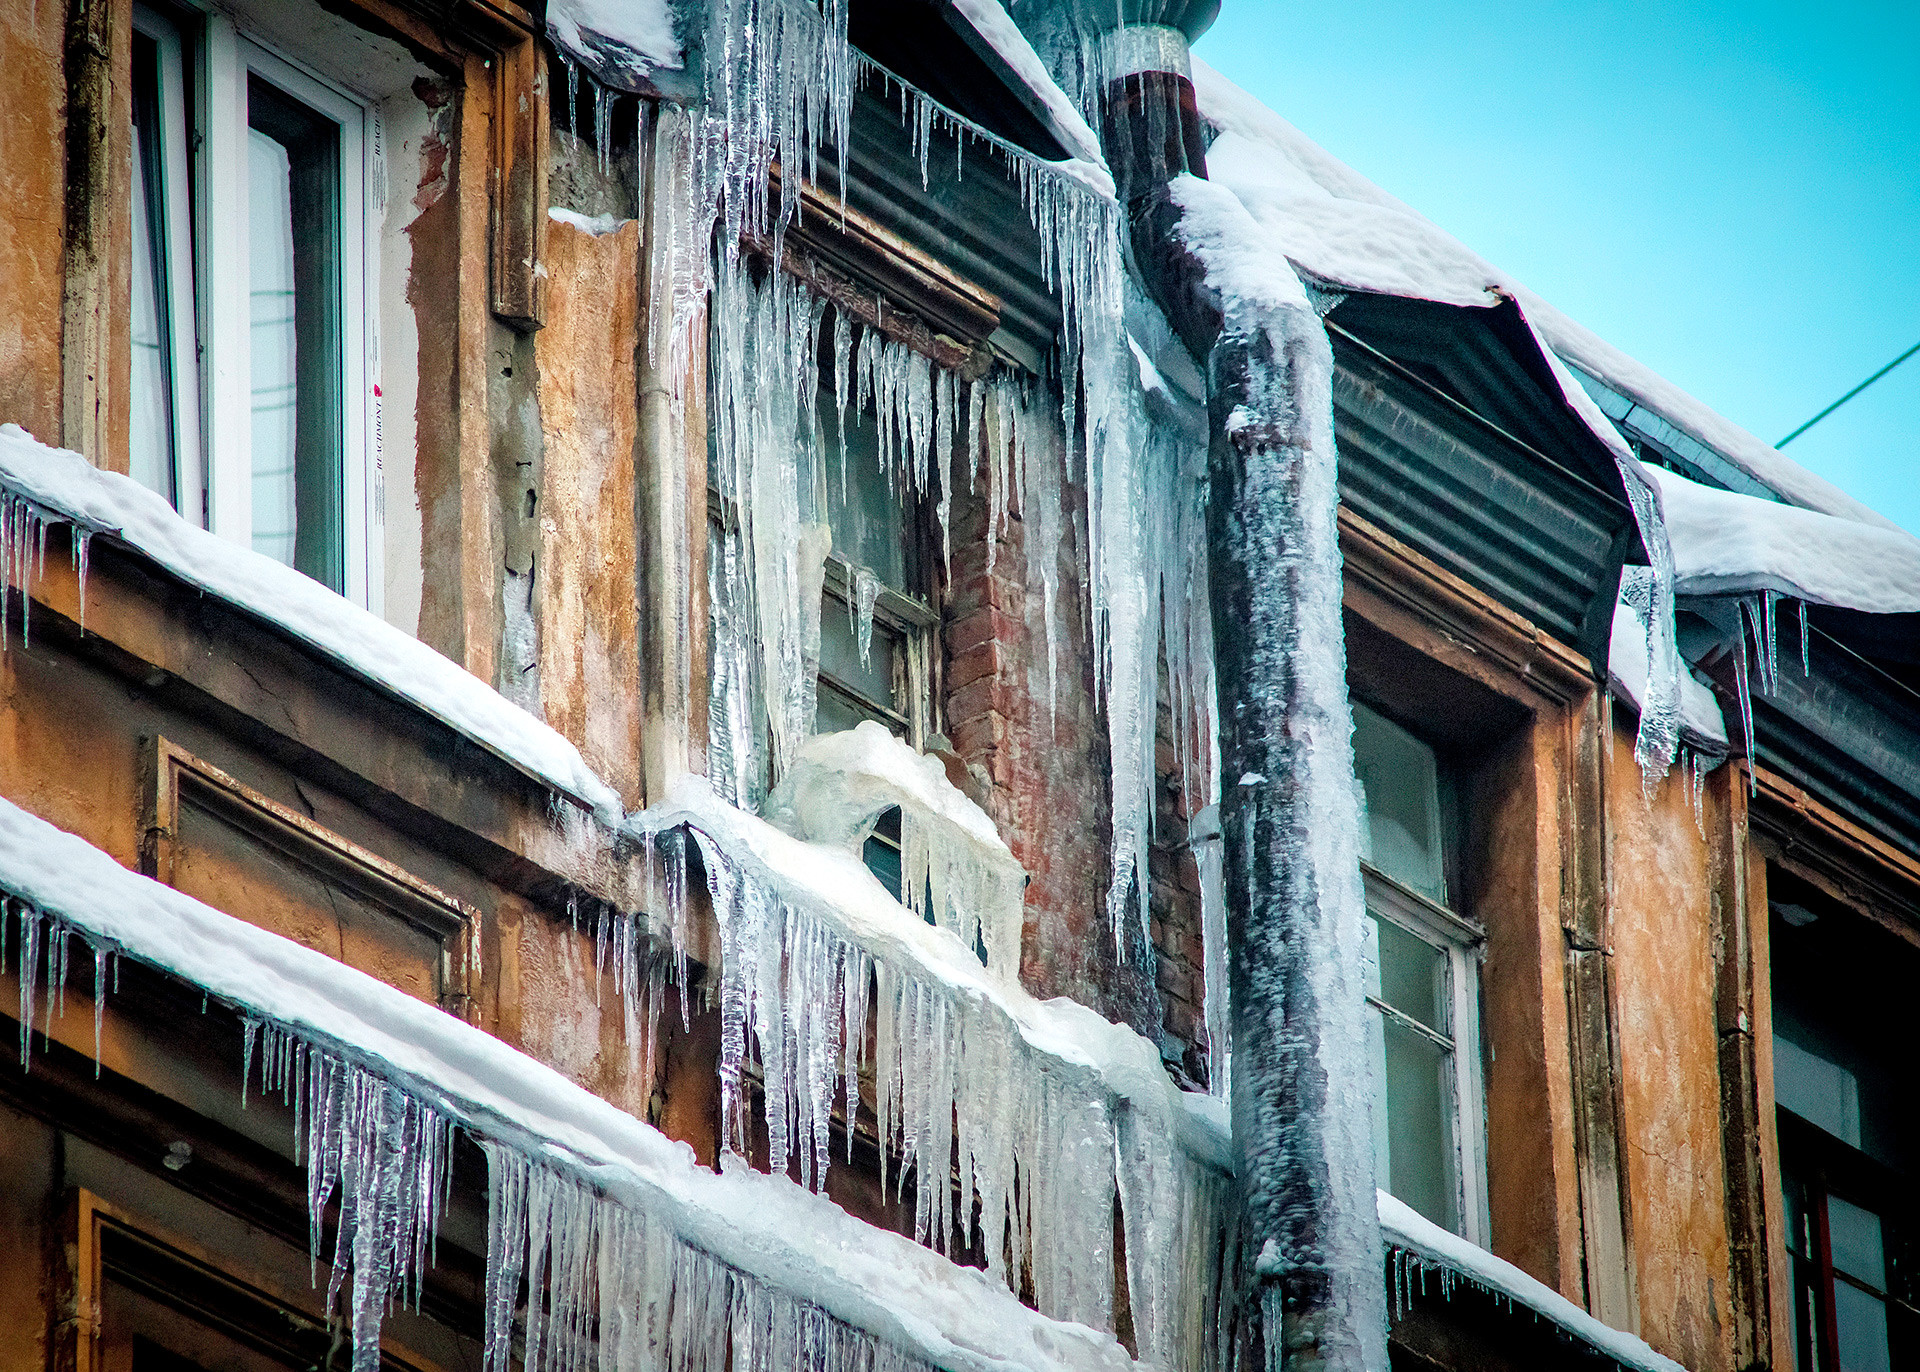 Lifehack: If you see icicles like that, it's probably the best to stay away from them.